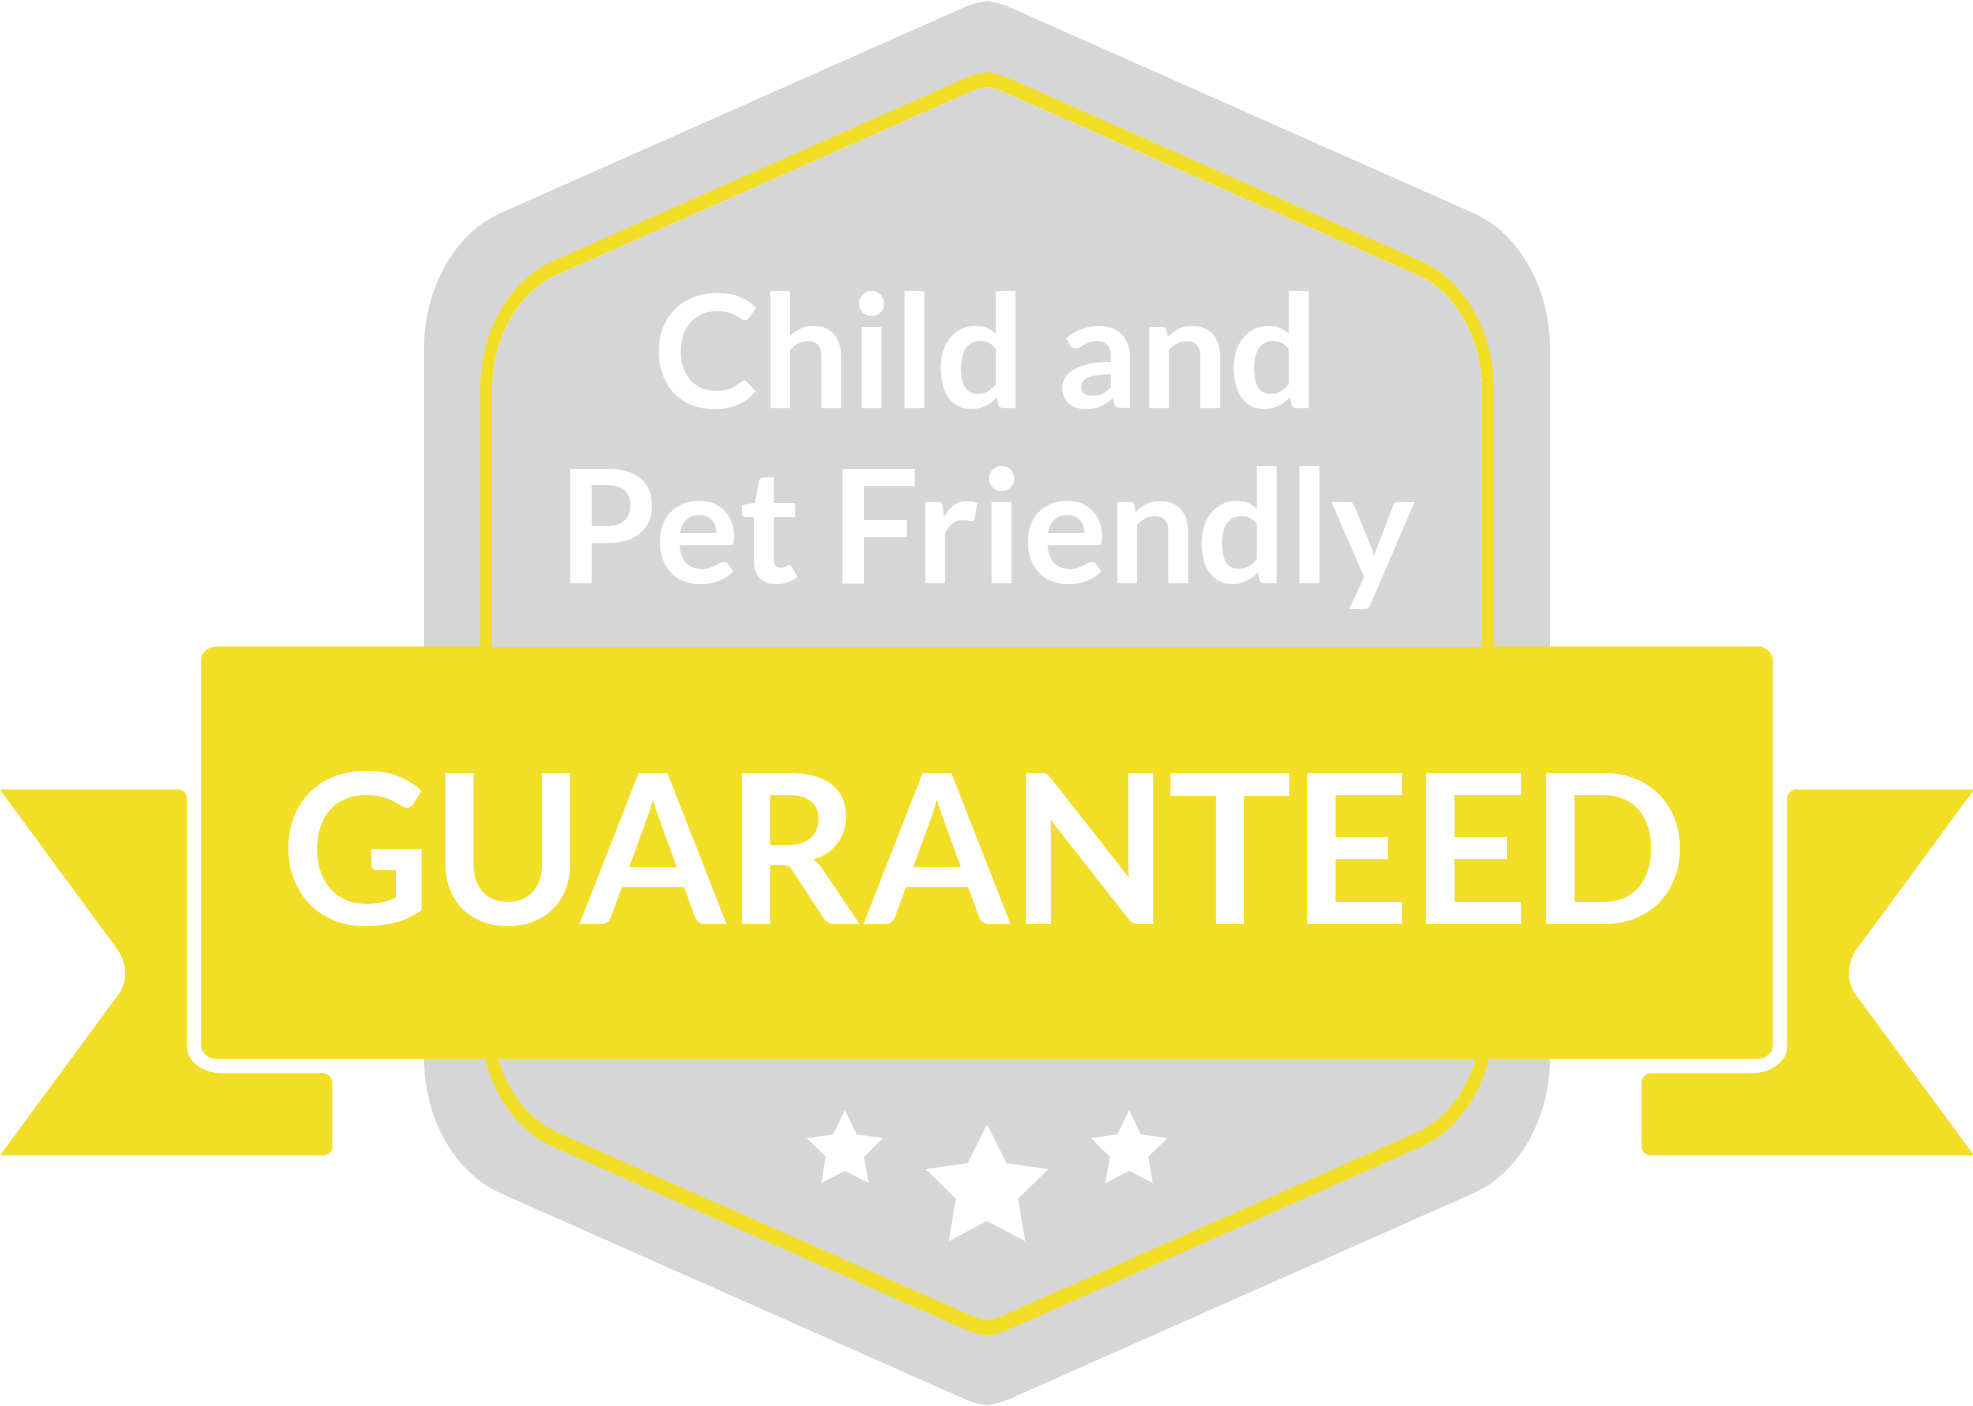 Child and Pet Friendly